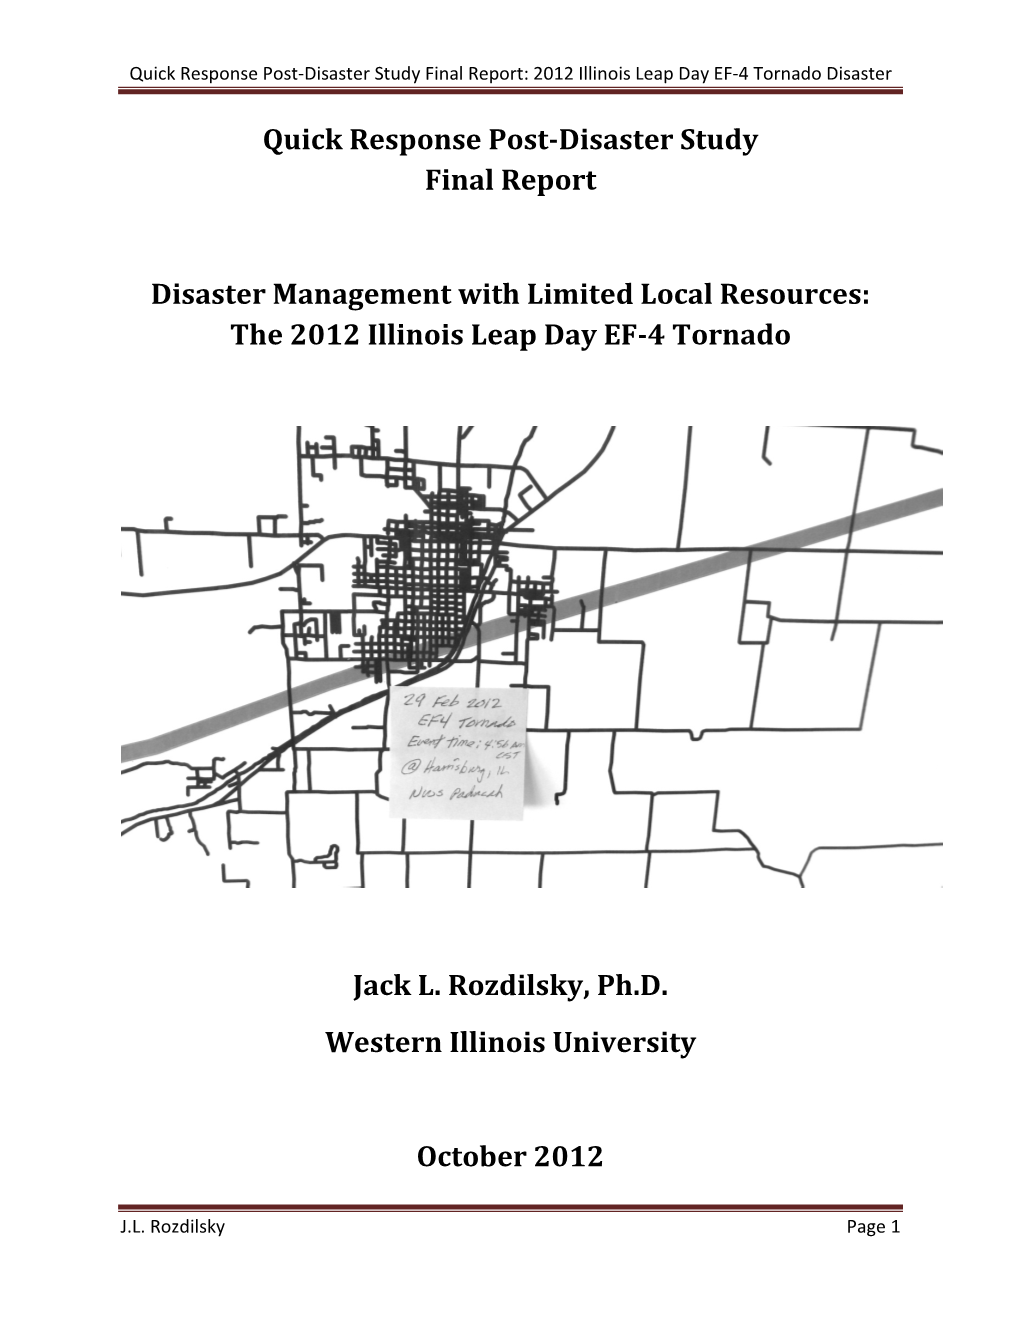 2012 Illinois Leap Day EF-4 Tornado Disaster